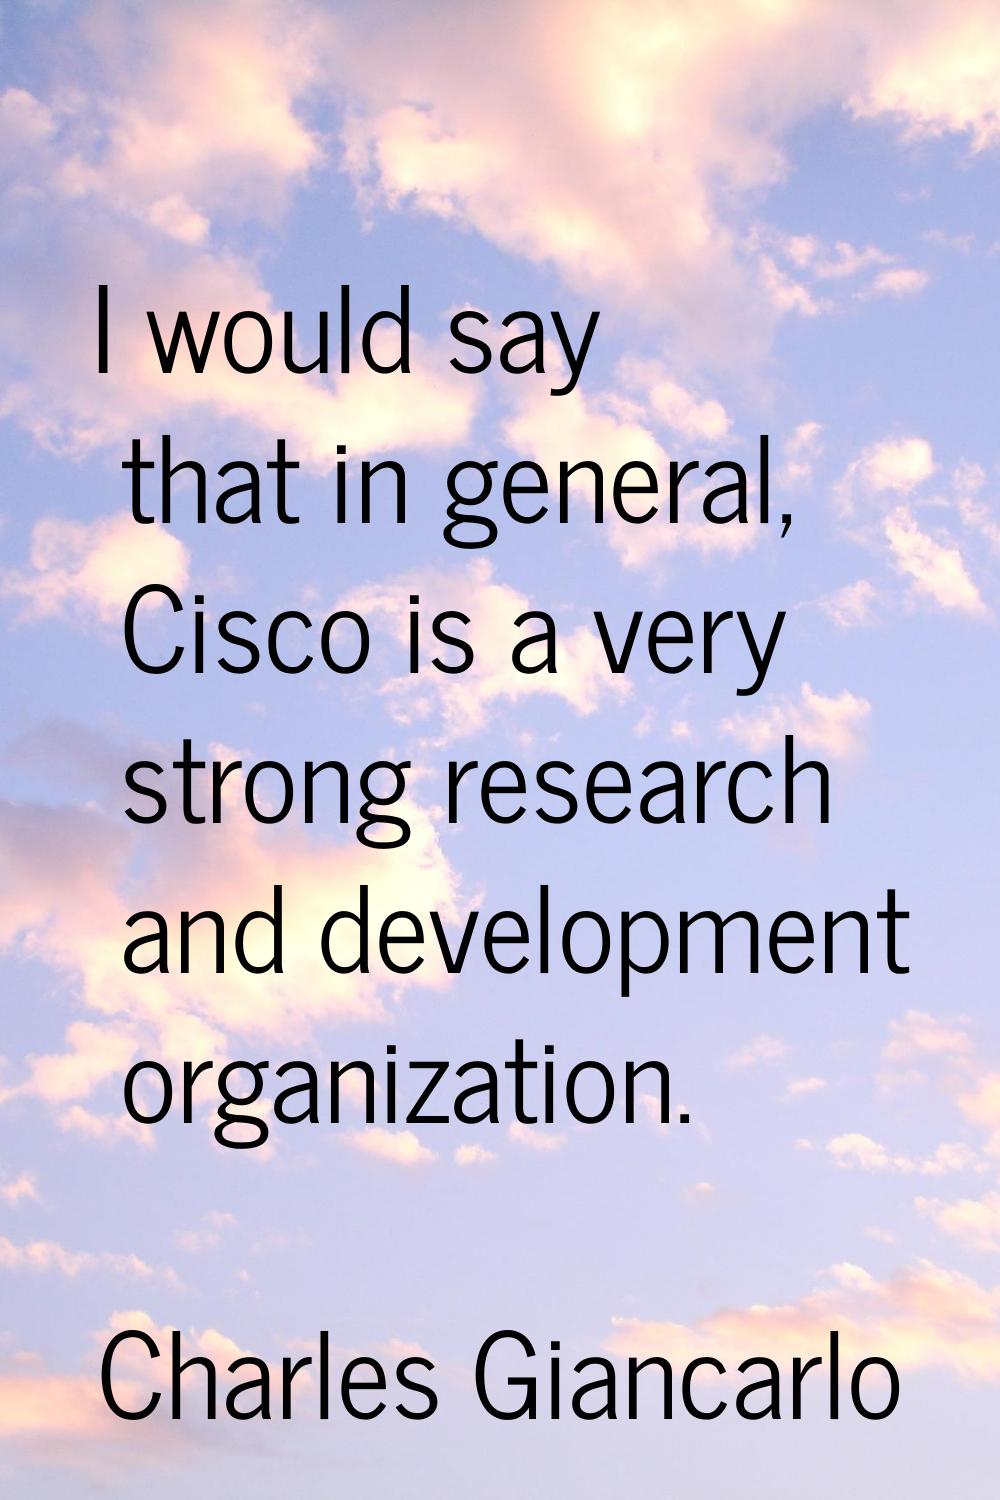 I would say that in general, Cisco is a very strong research and development organization.